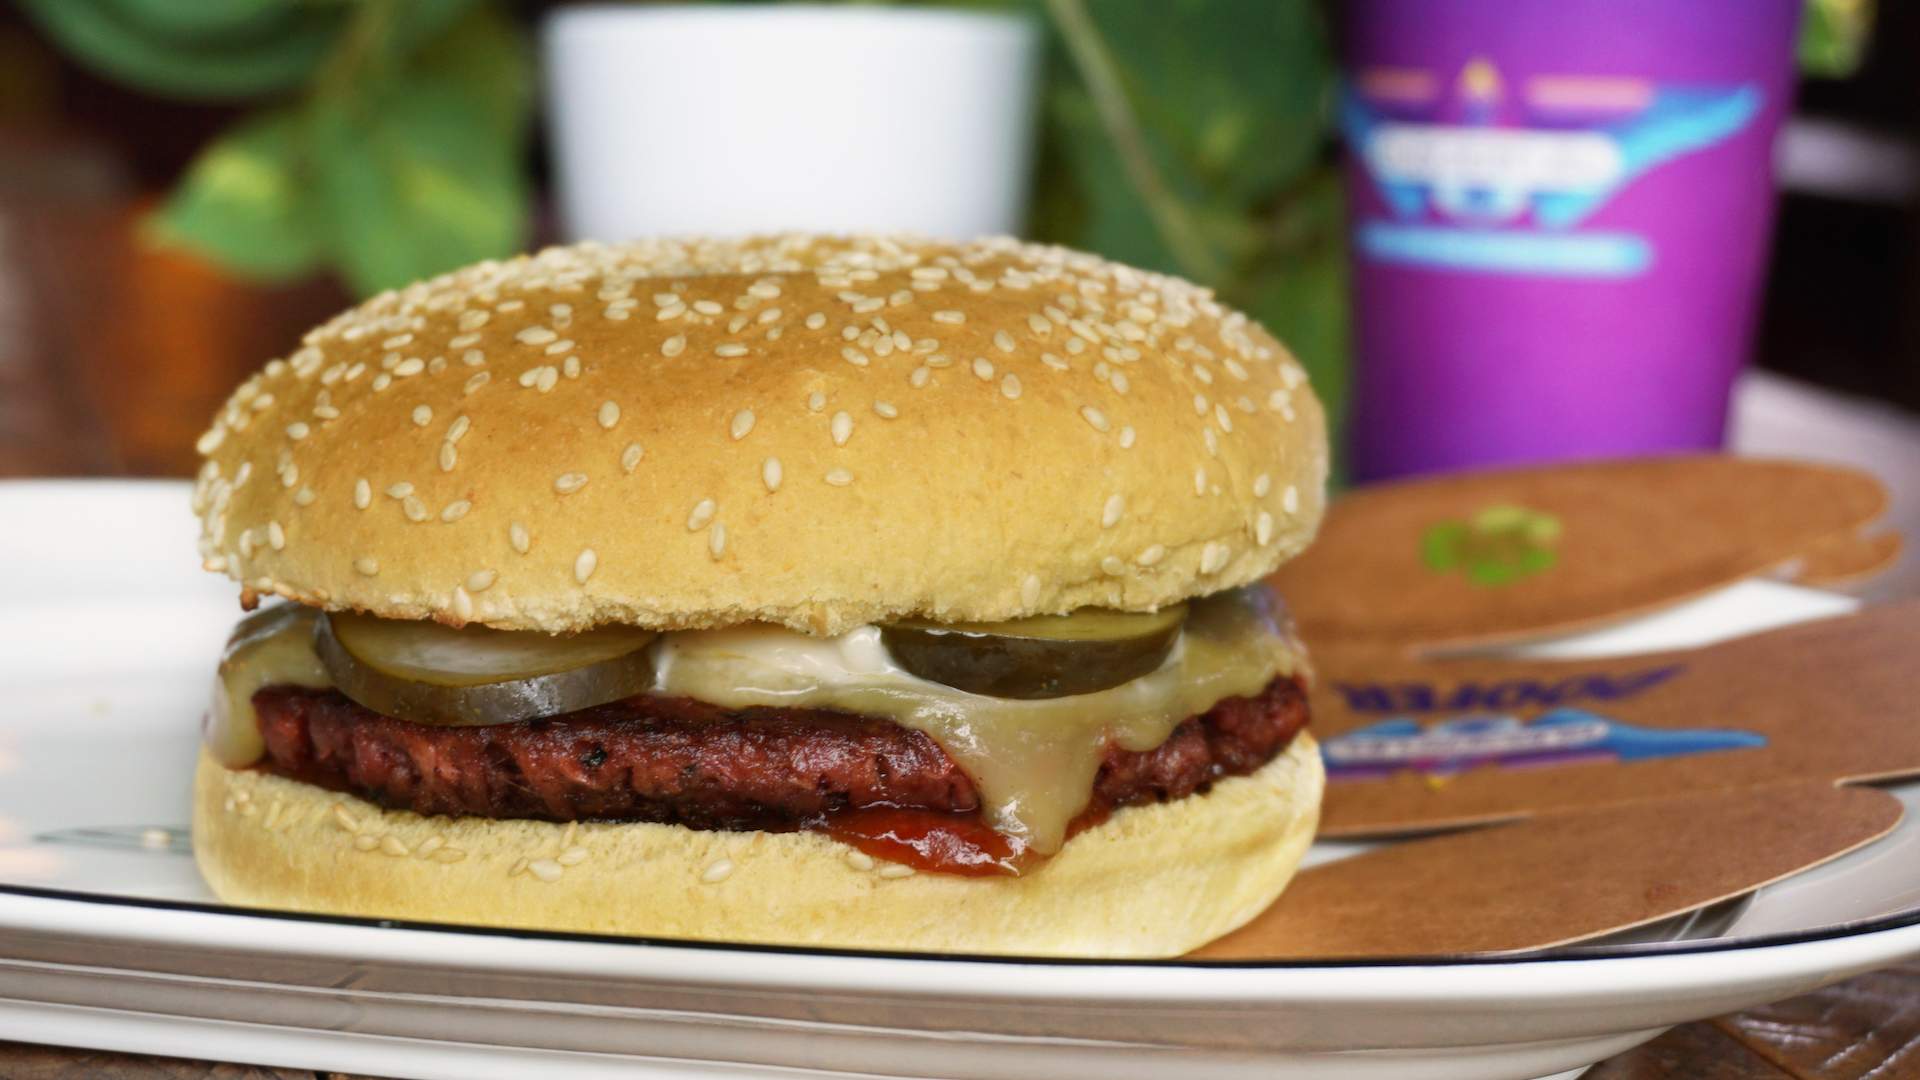 We're Giving Away Free Plant-Powered Cheeseburgers from BurgerFuel